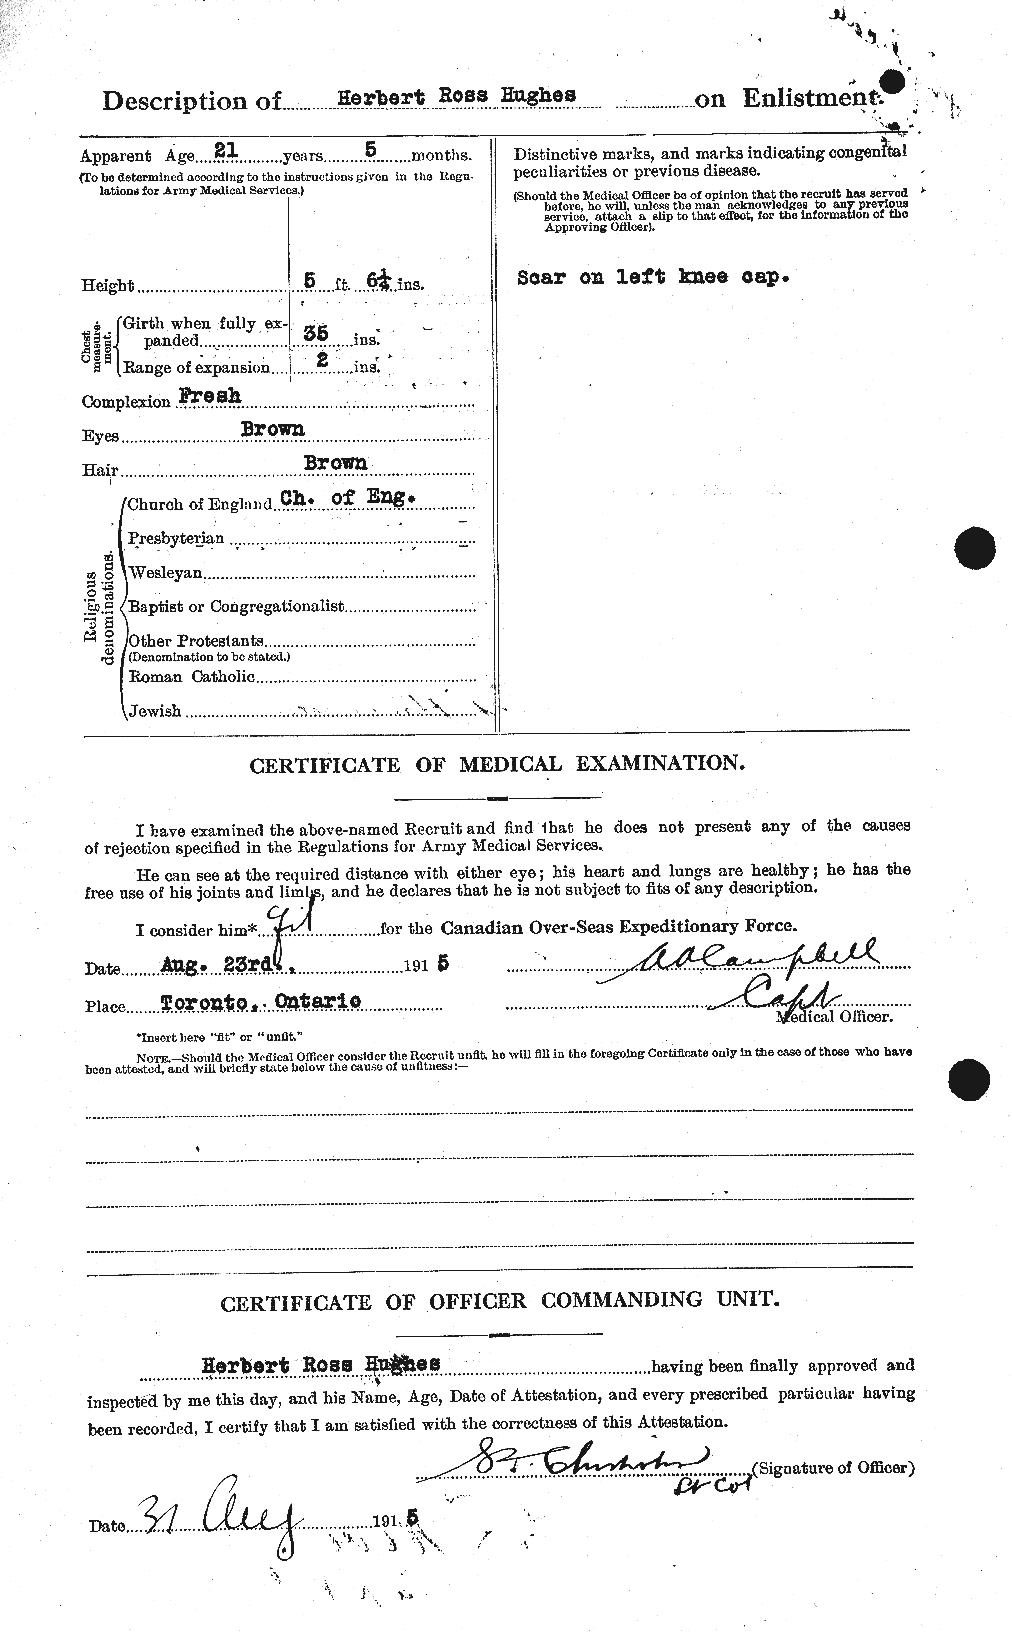 Personnel Records of the First World War - CEF 403904b